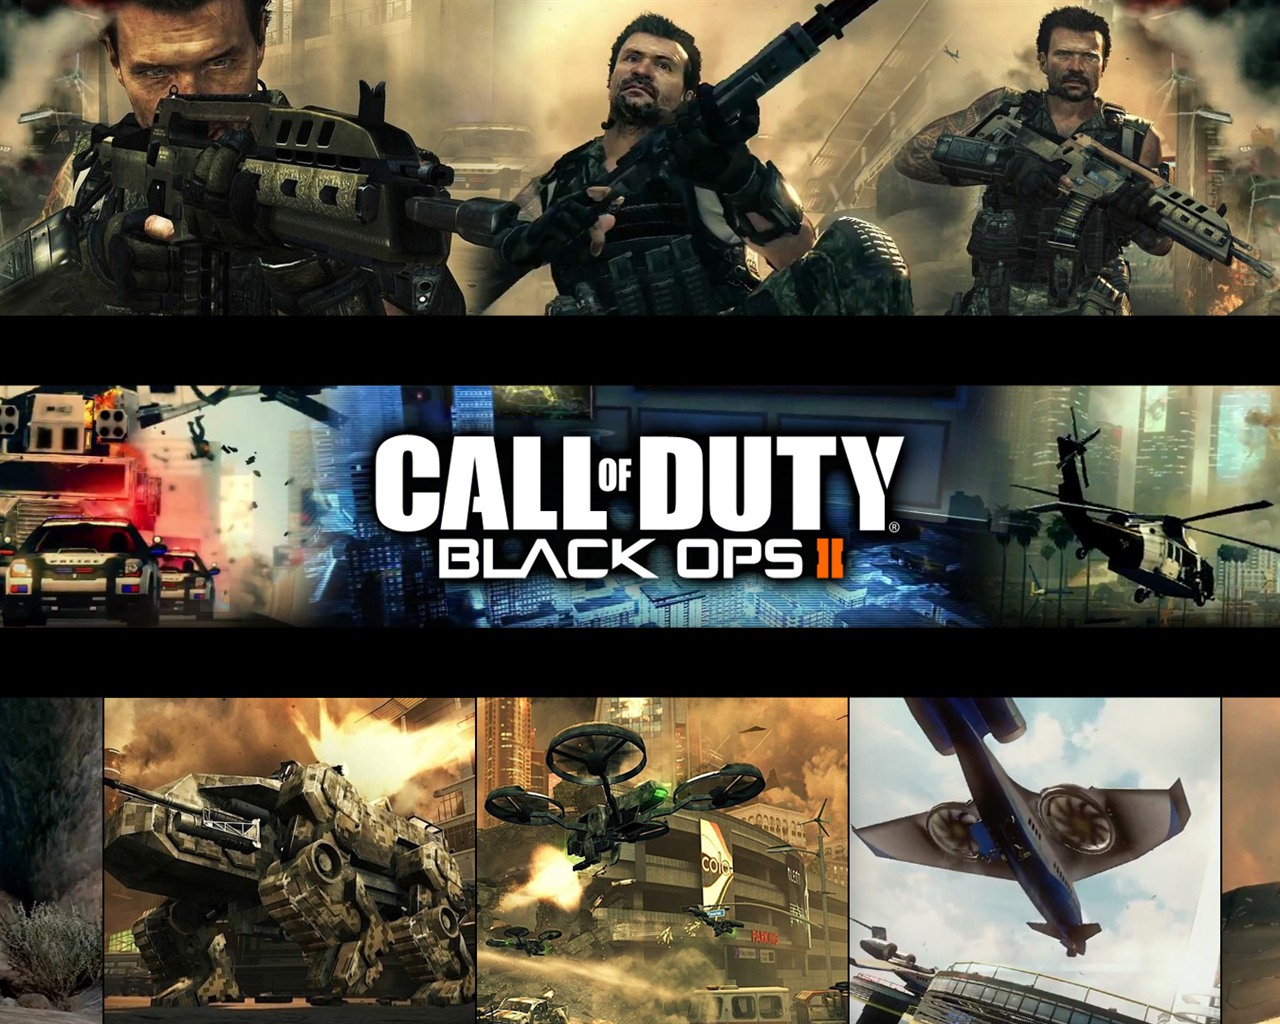 Call of Duty: Black Ops 2 HD wallpapers #2 - 1280x1024